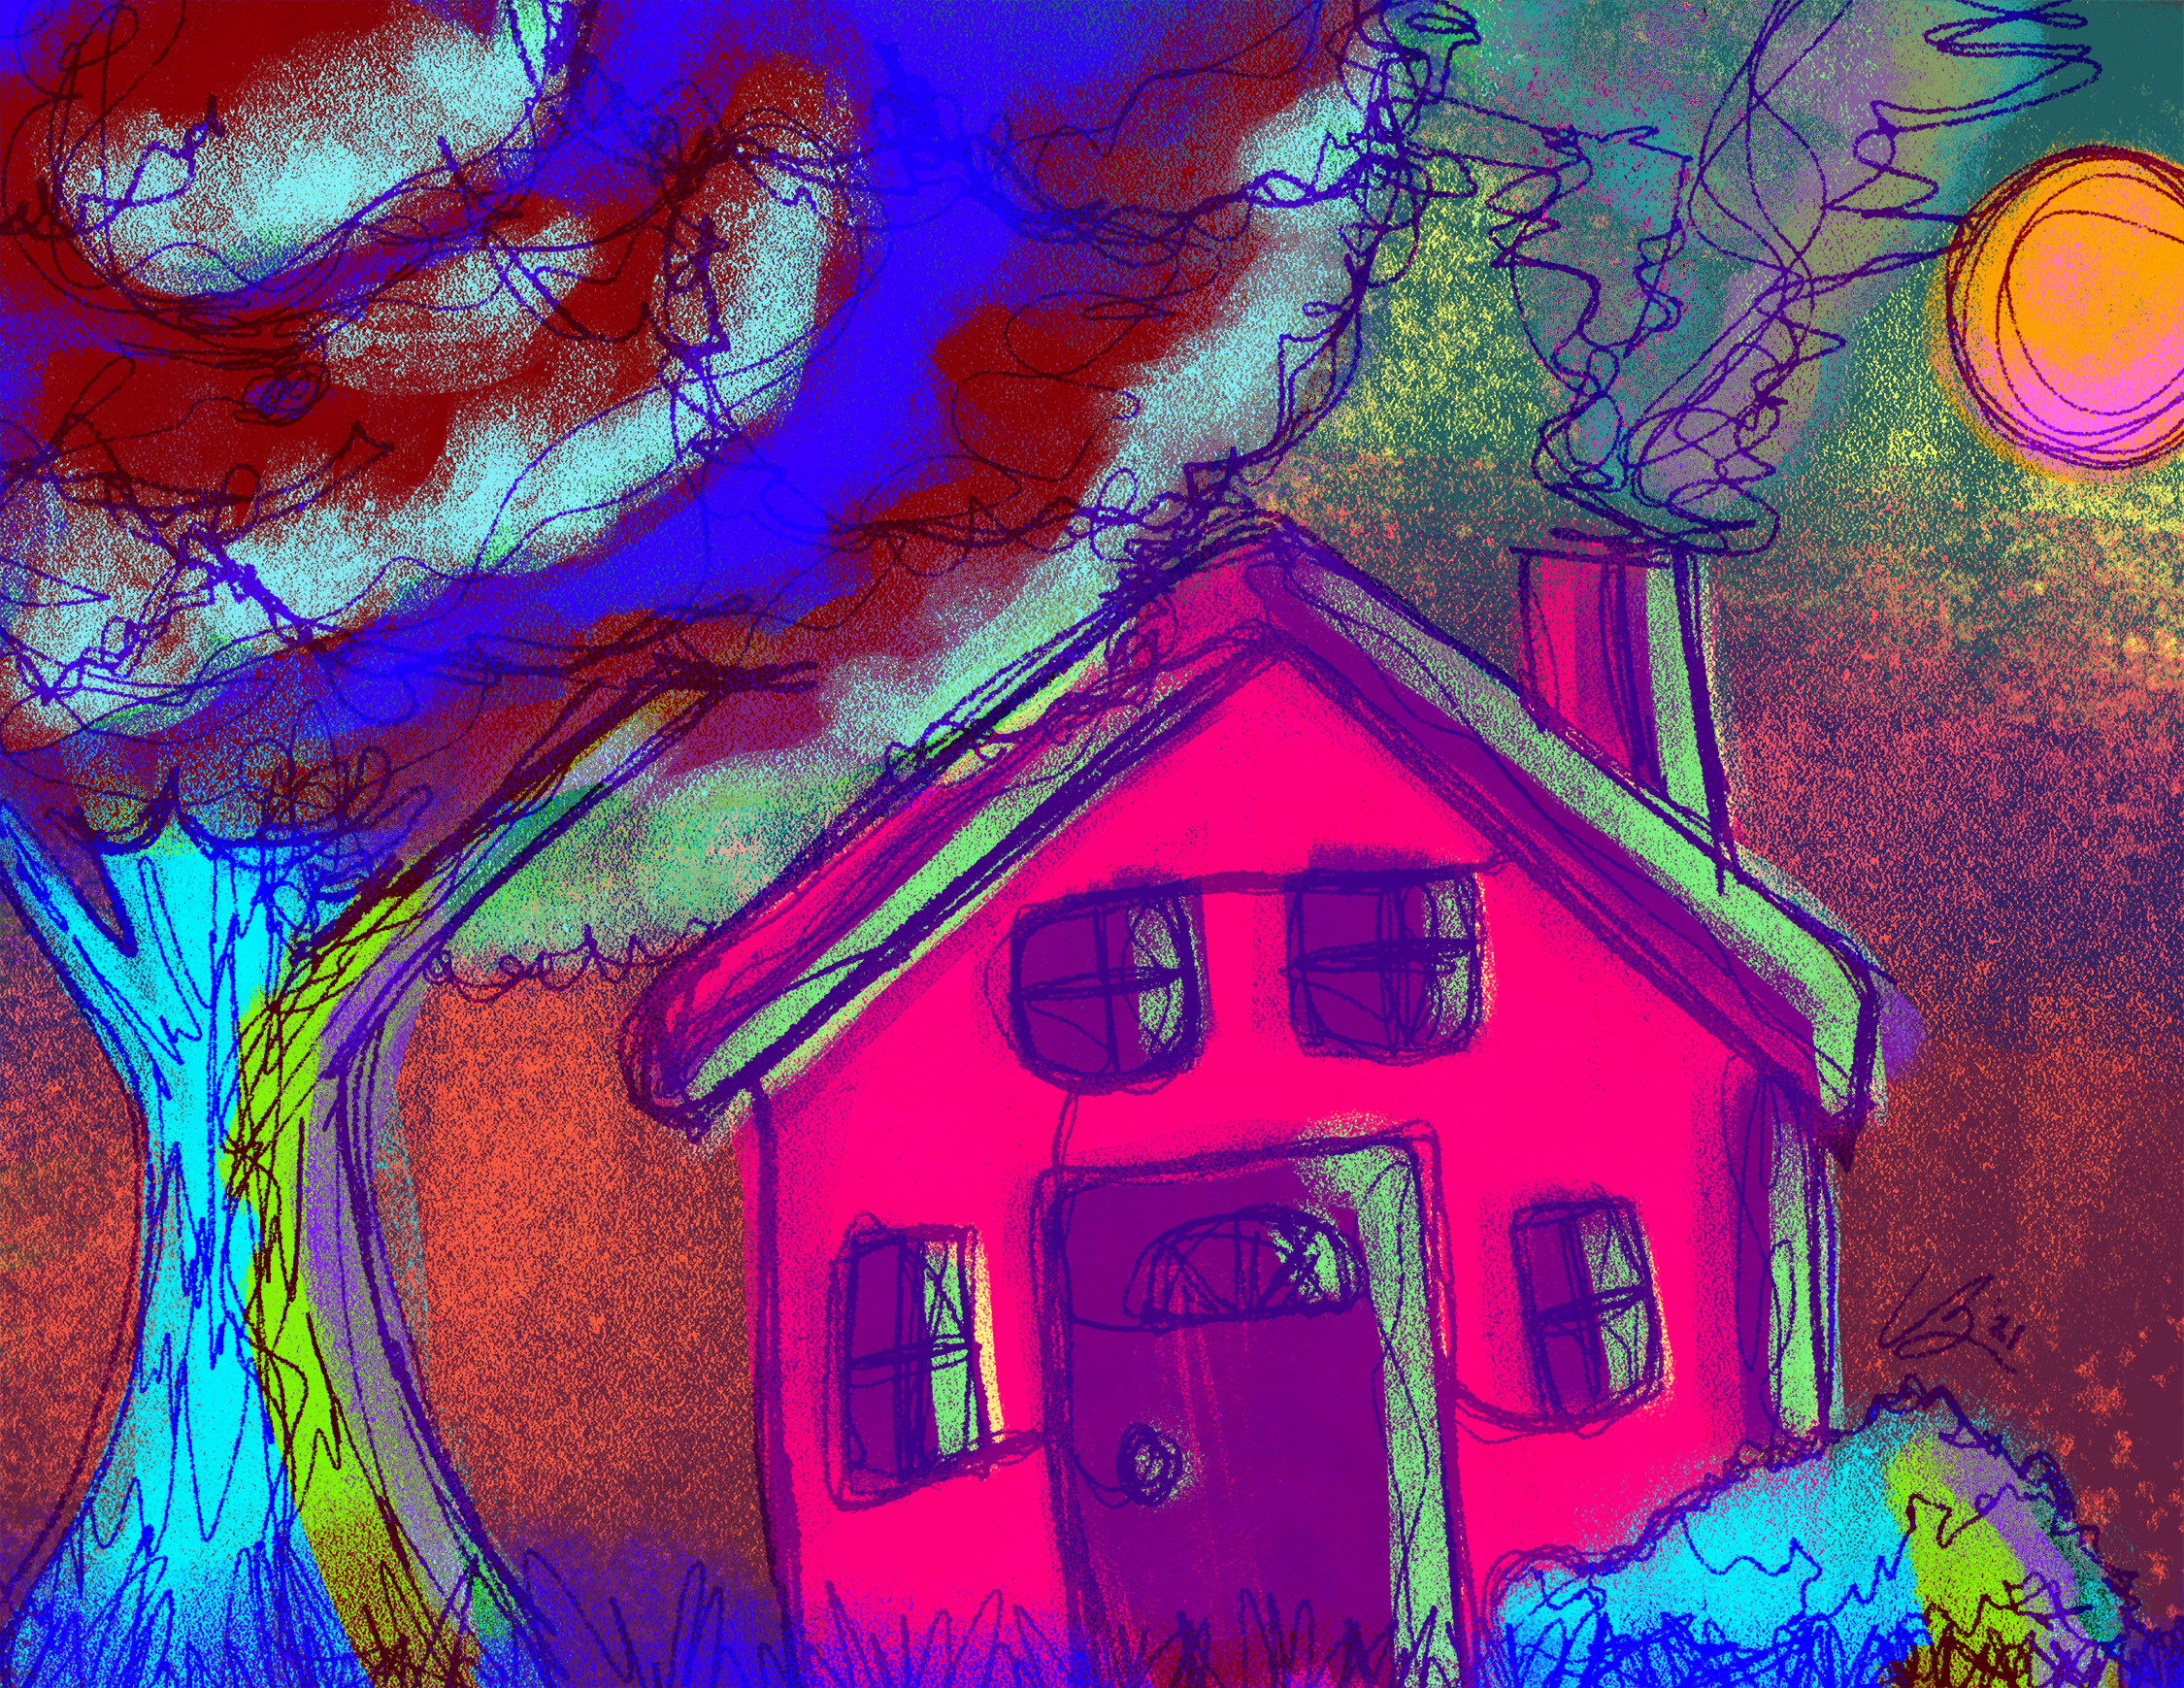 Simplistic contour drawing of a small house and tree with a vibrant color palette